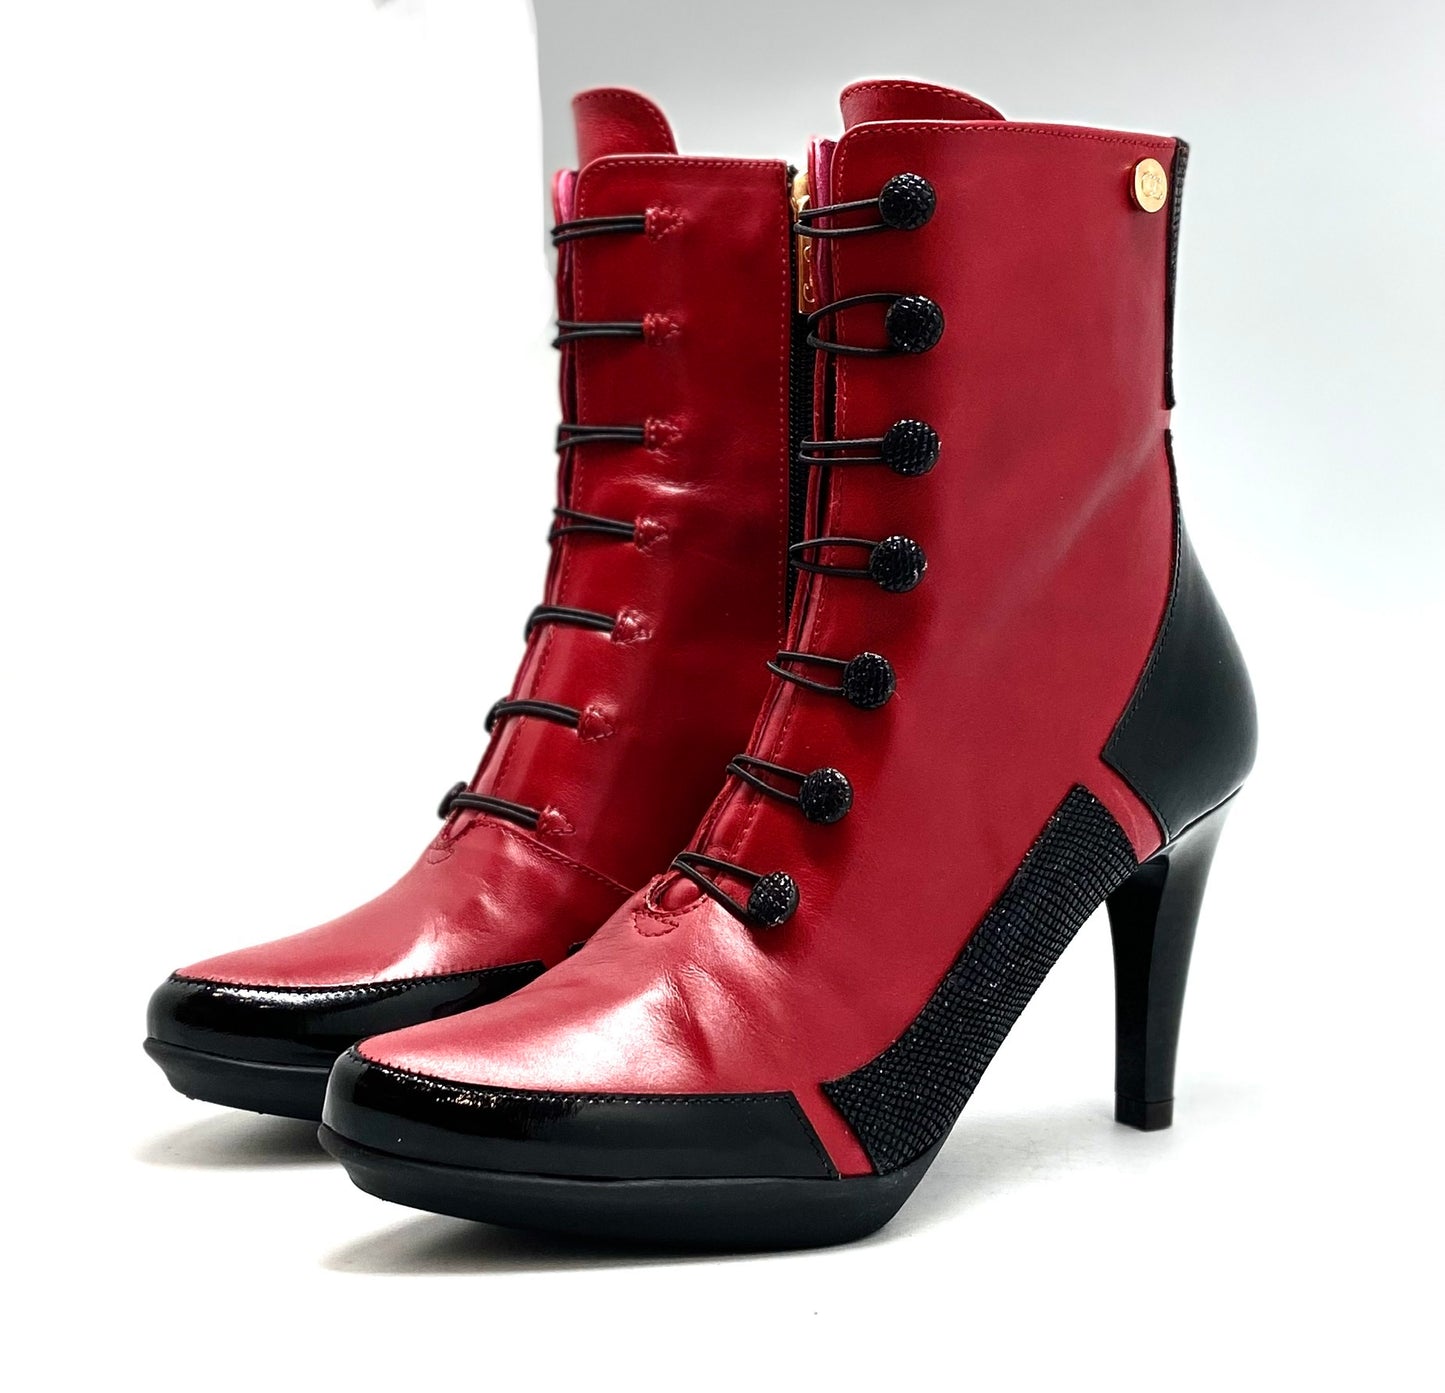 St Lucia - Red/Black- Button boot - Pre Order now!